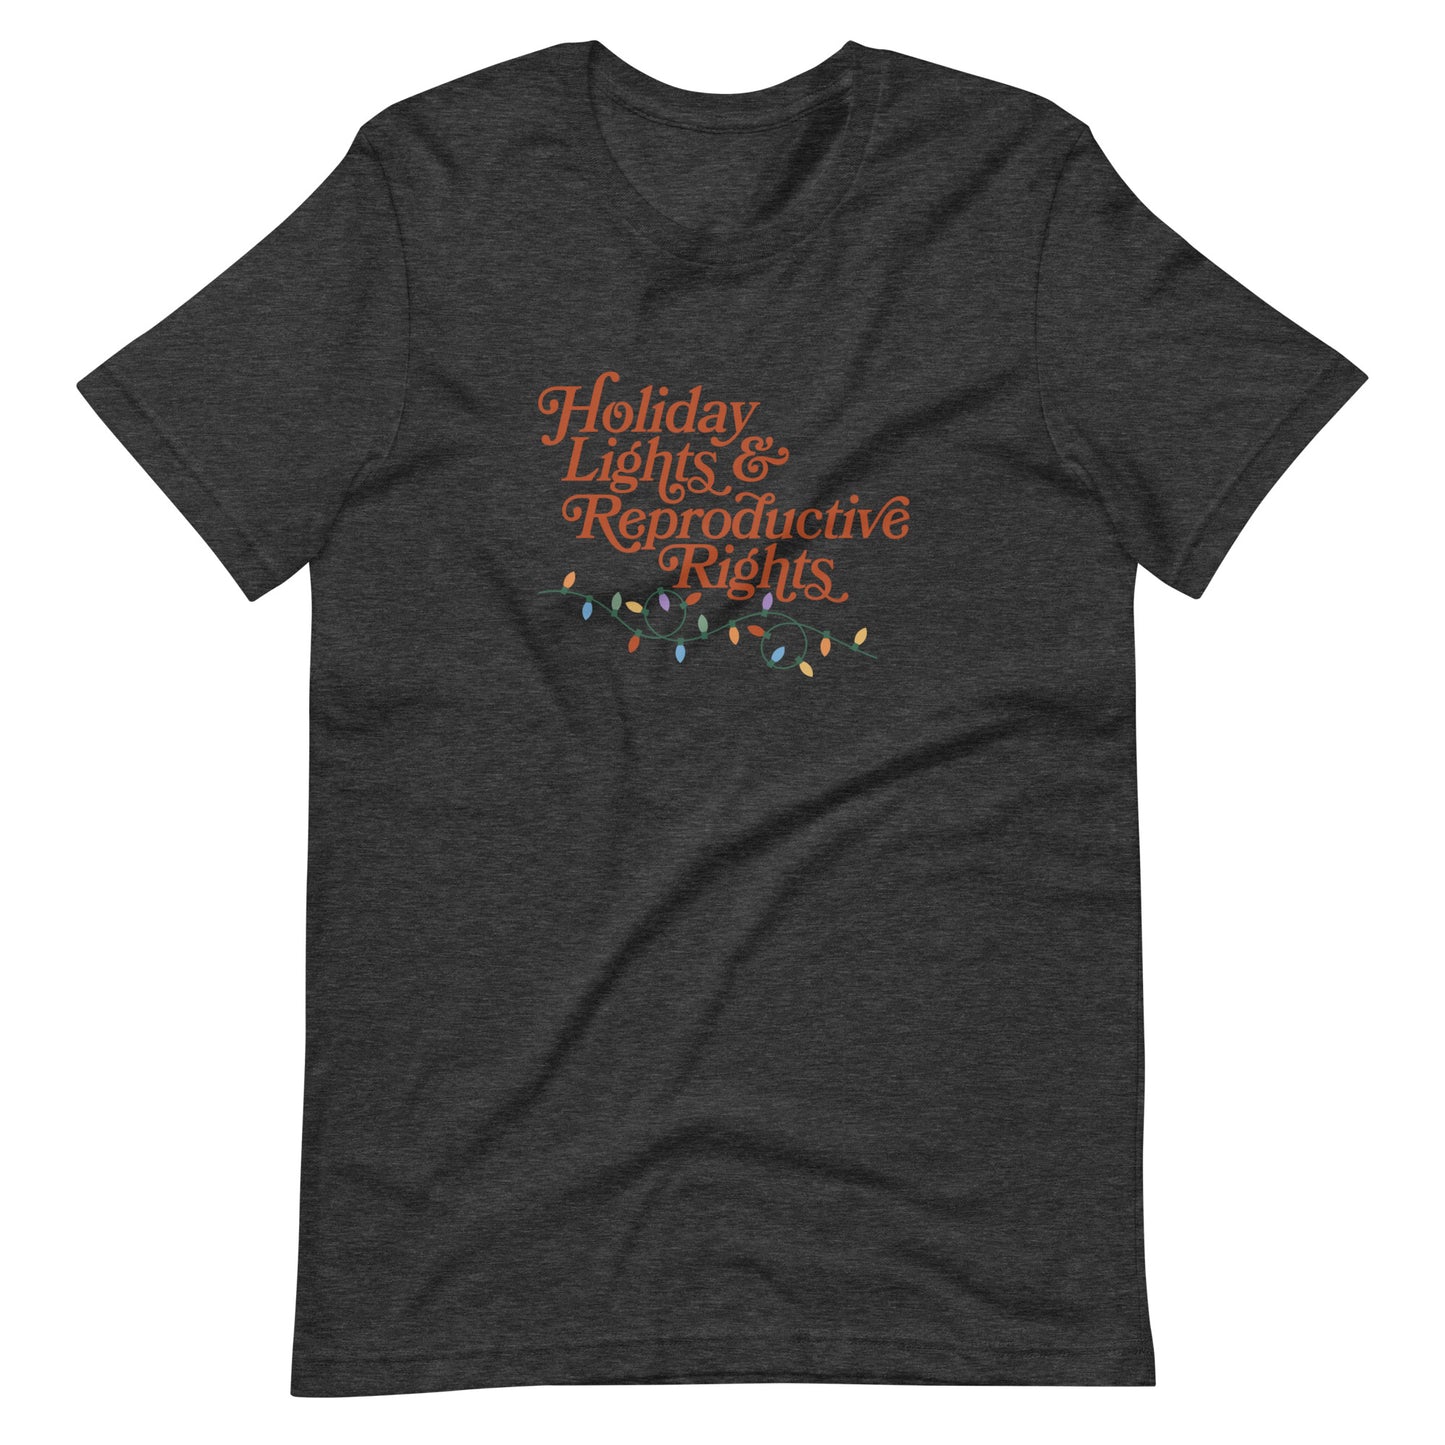 Holiday Lights & Reproductive Rights Unisex Tee